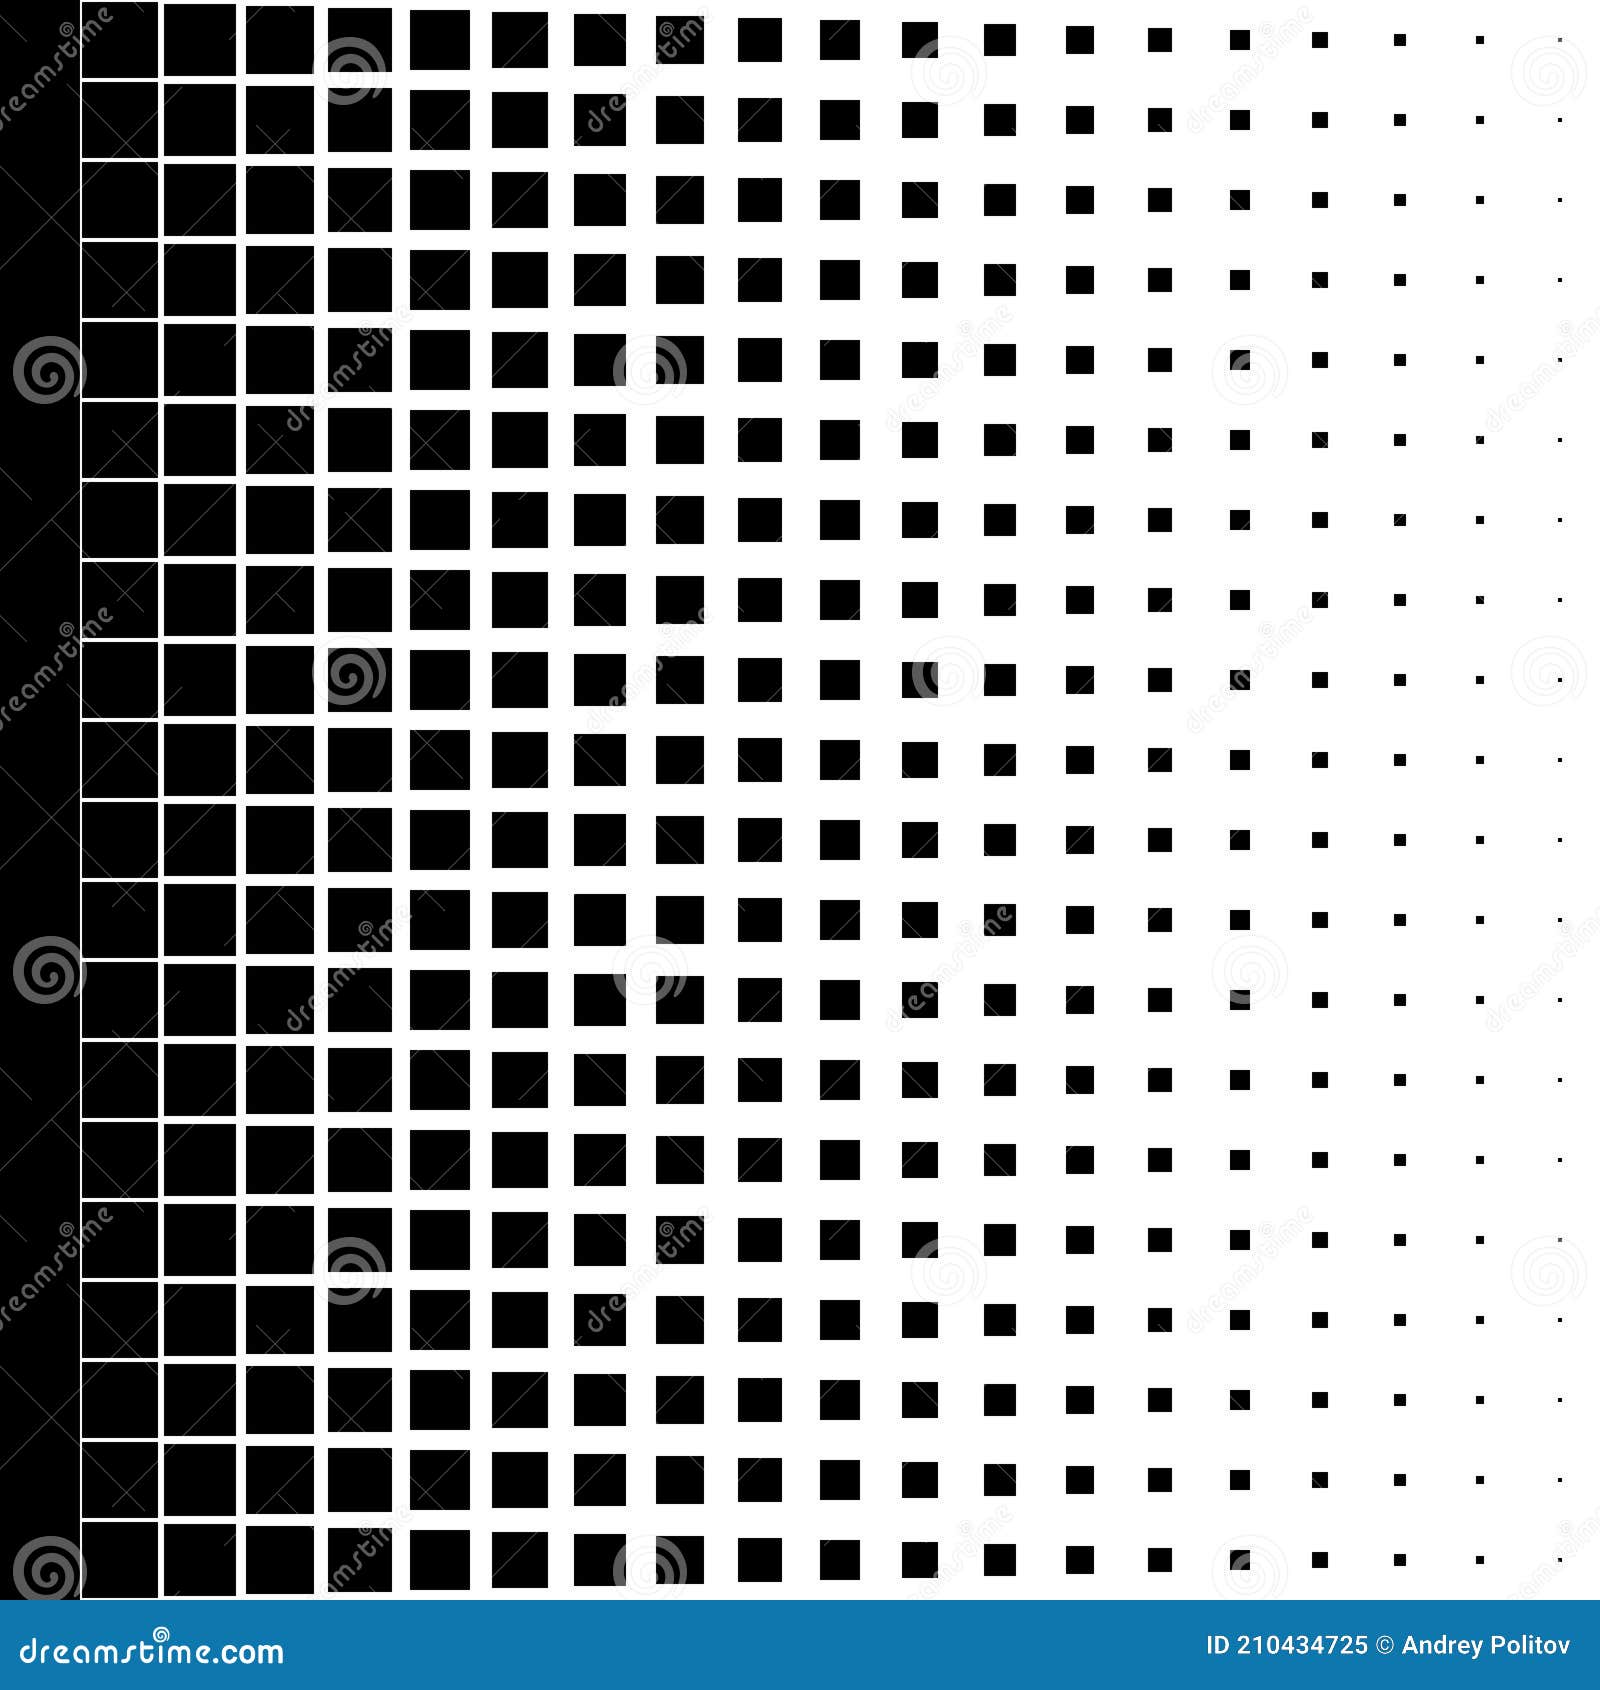 black squares decreased from left to right